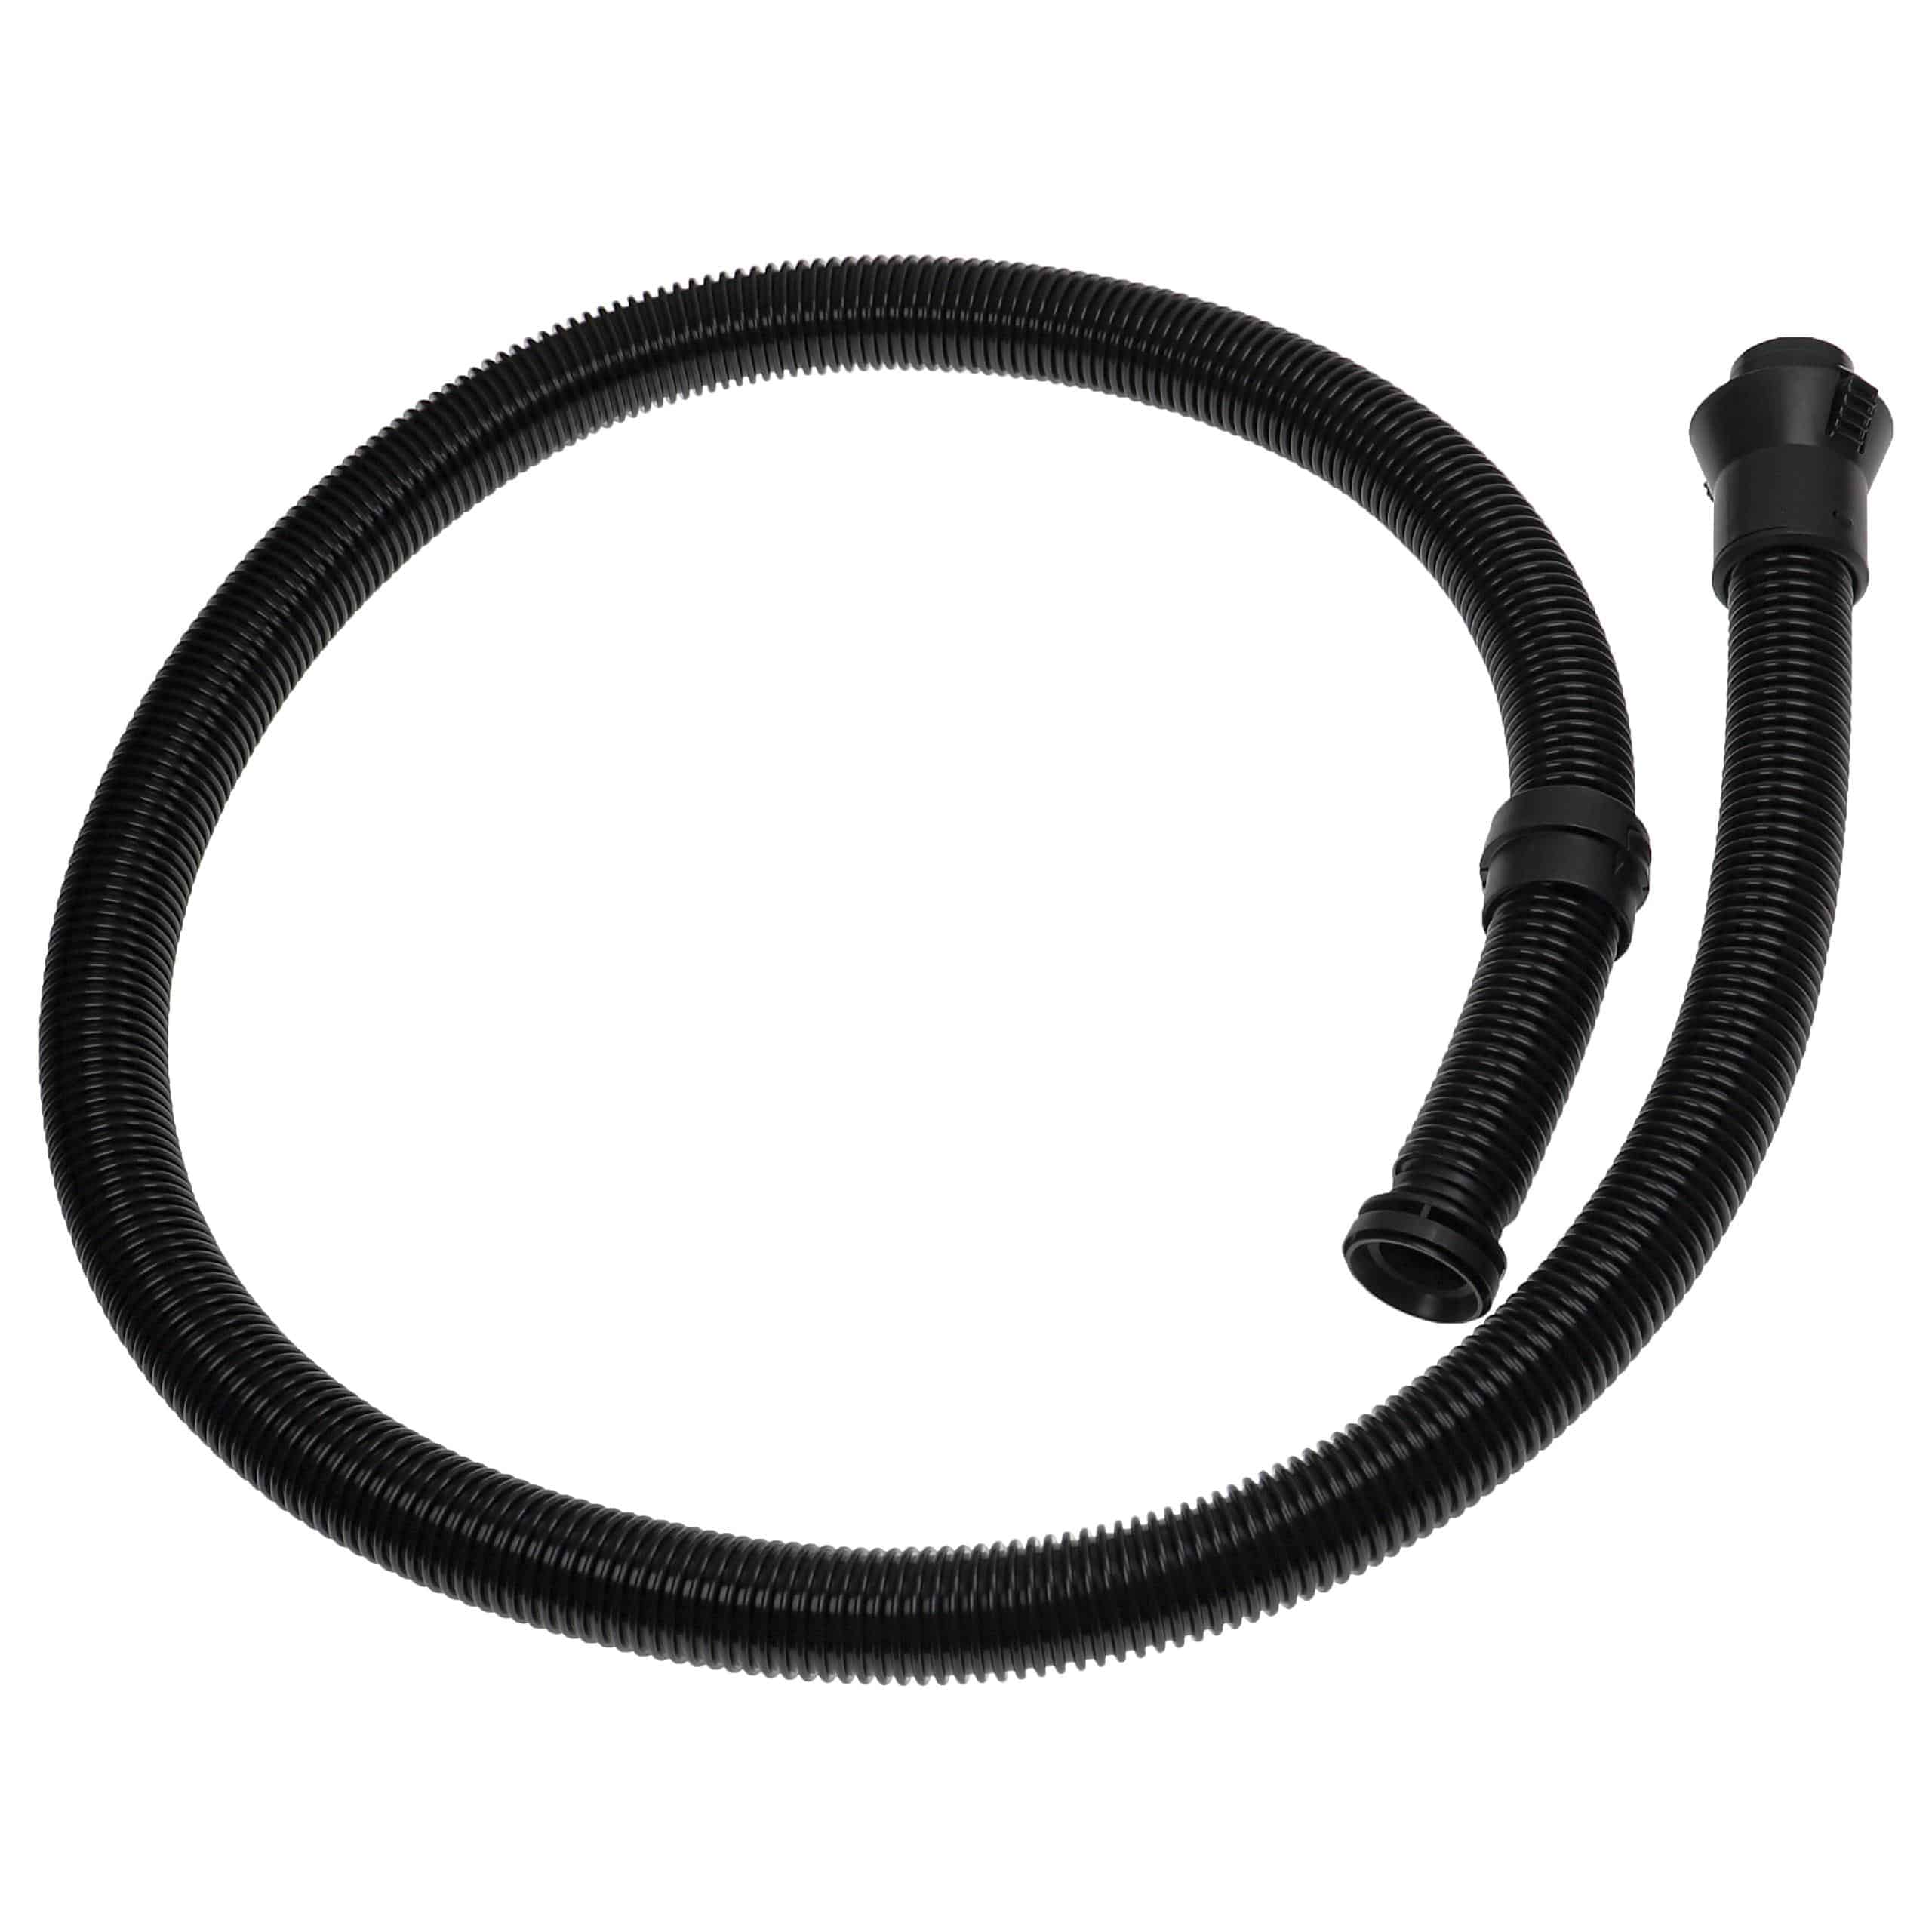 Hose as Replacement for Miele 07330631 - 1.8 m long